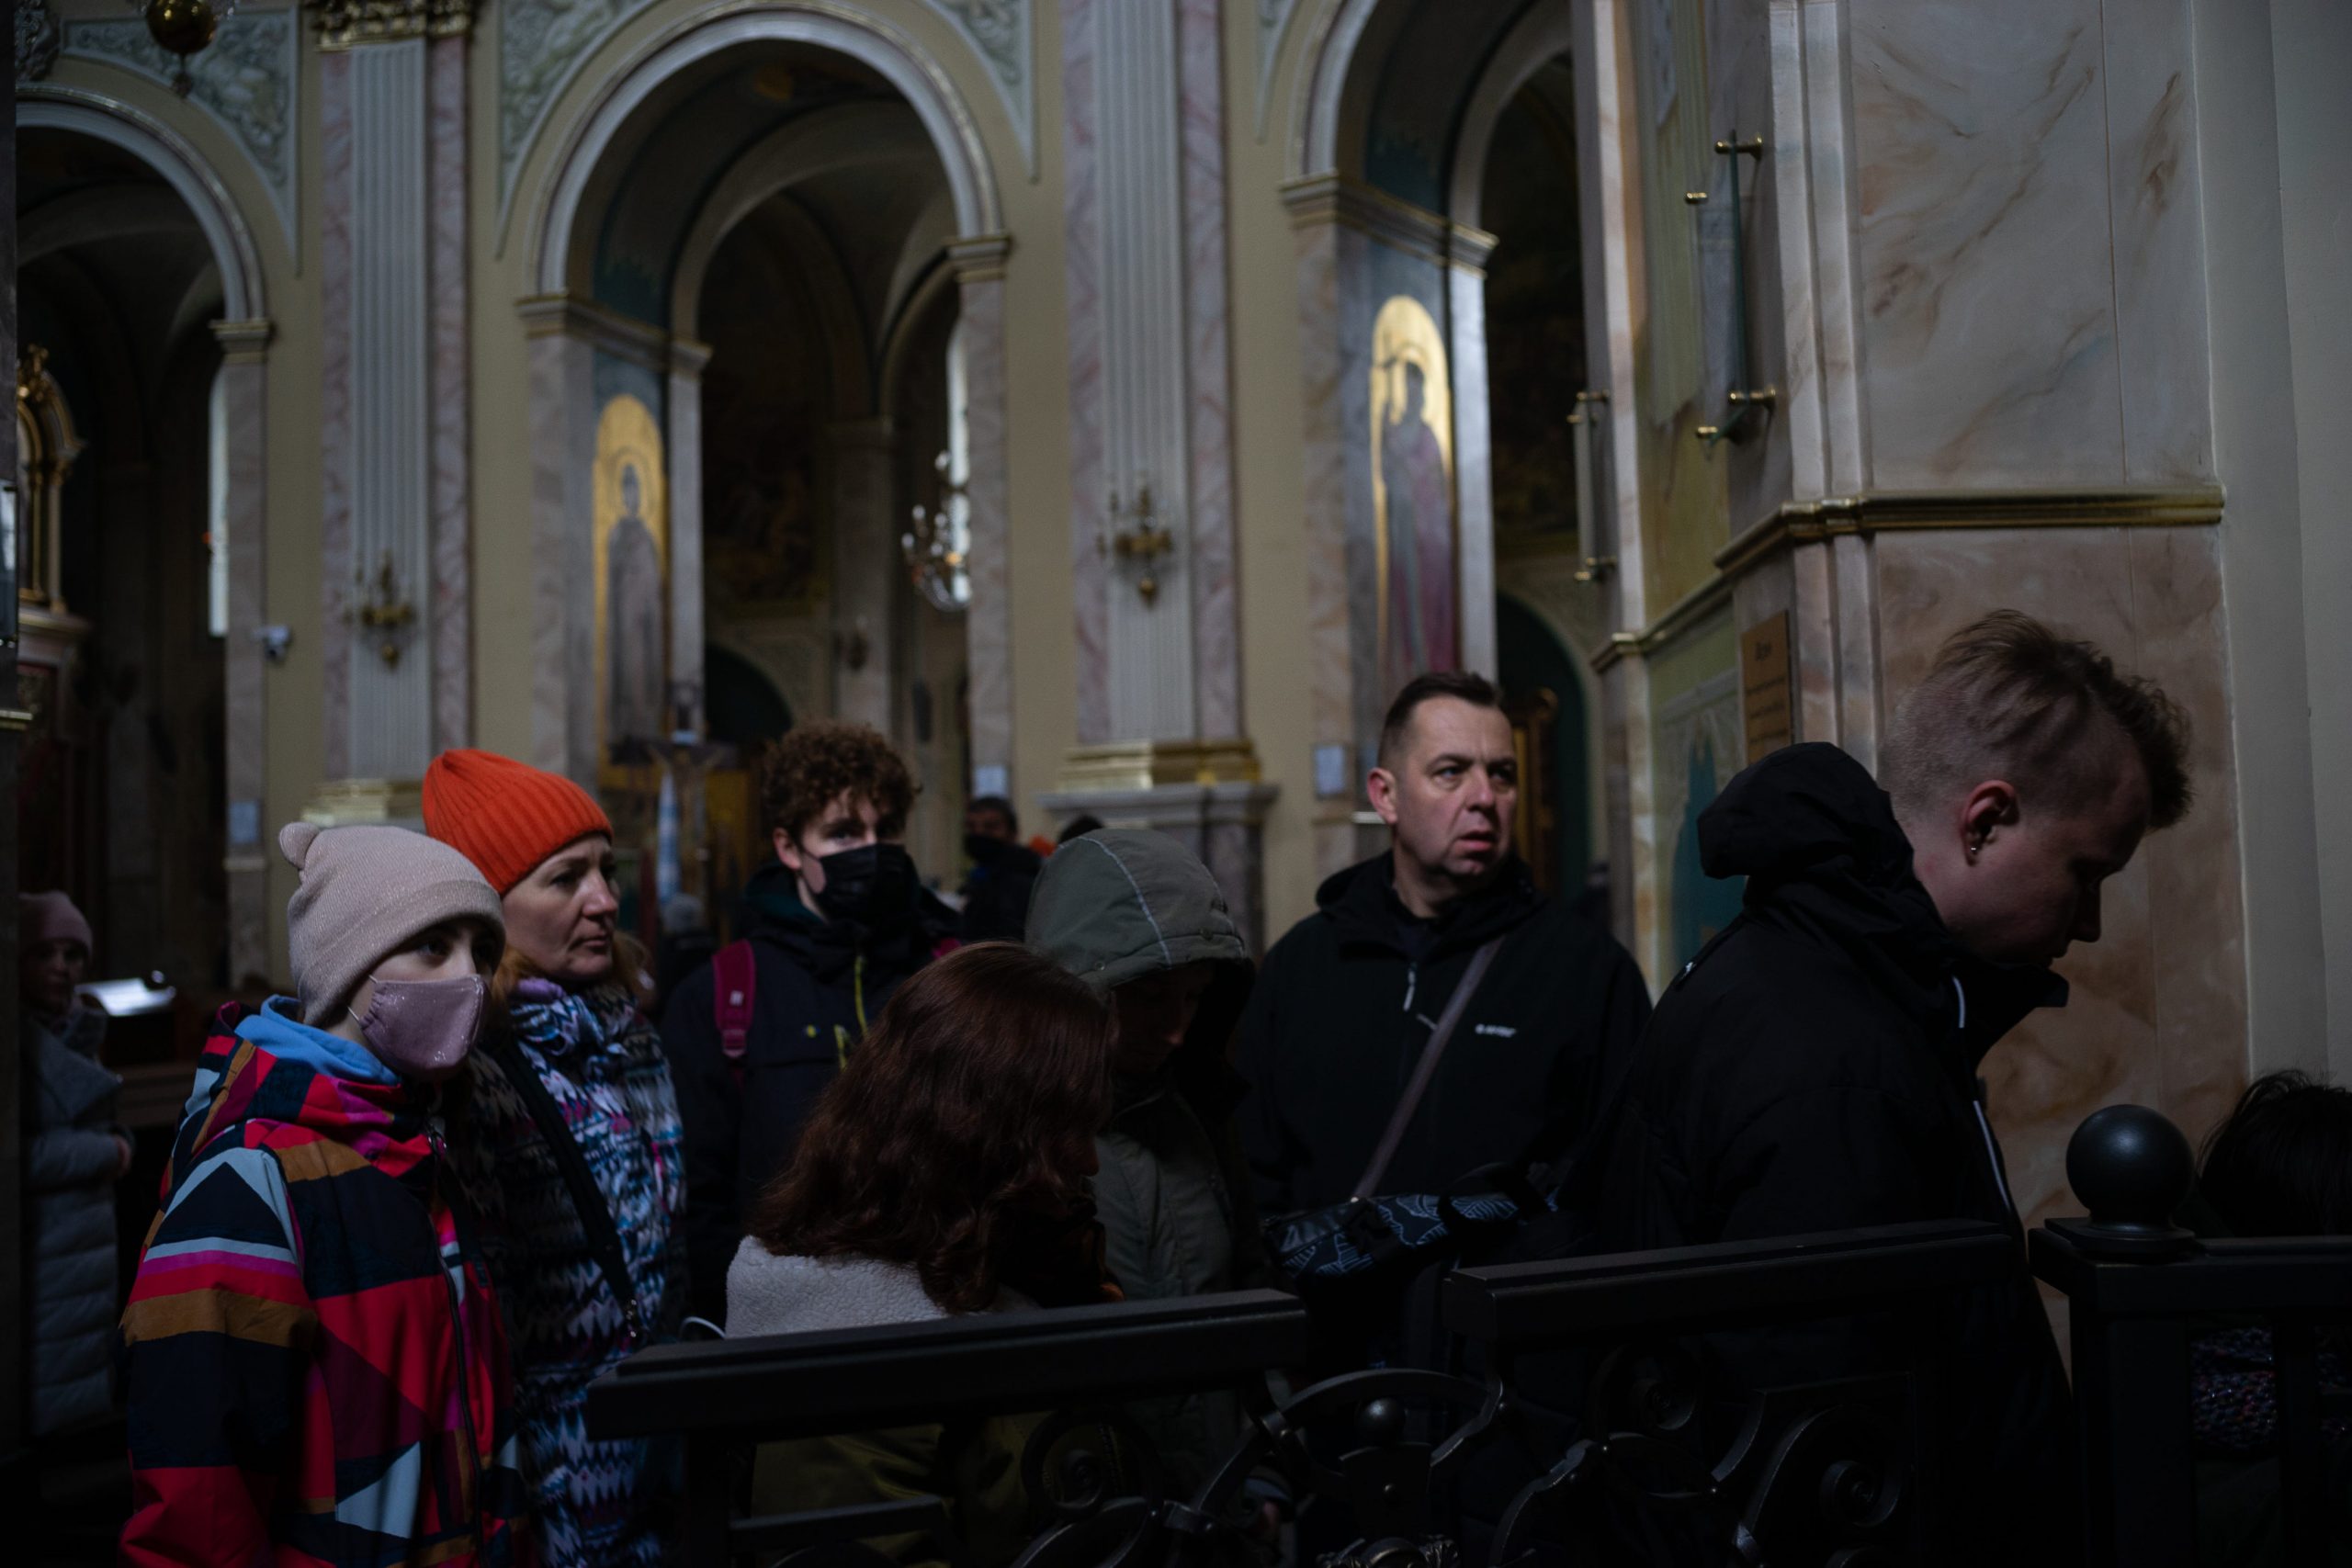 Ukrainians inside the Cathedral of the Conception of the Blessed Virgin Mary